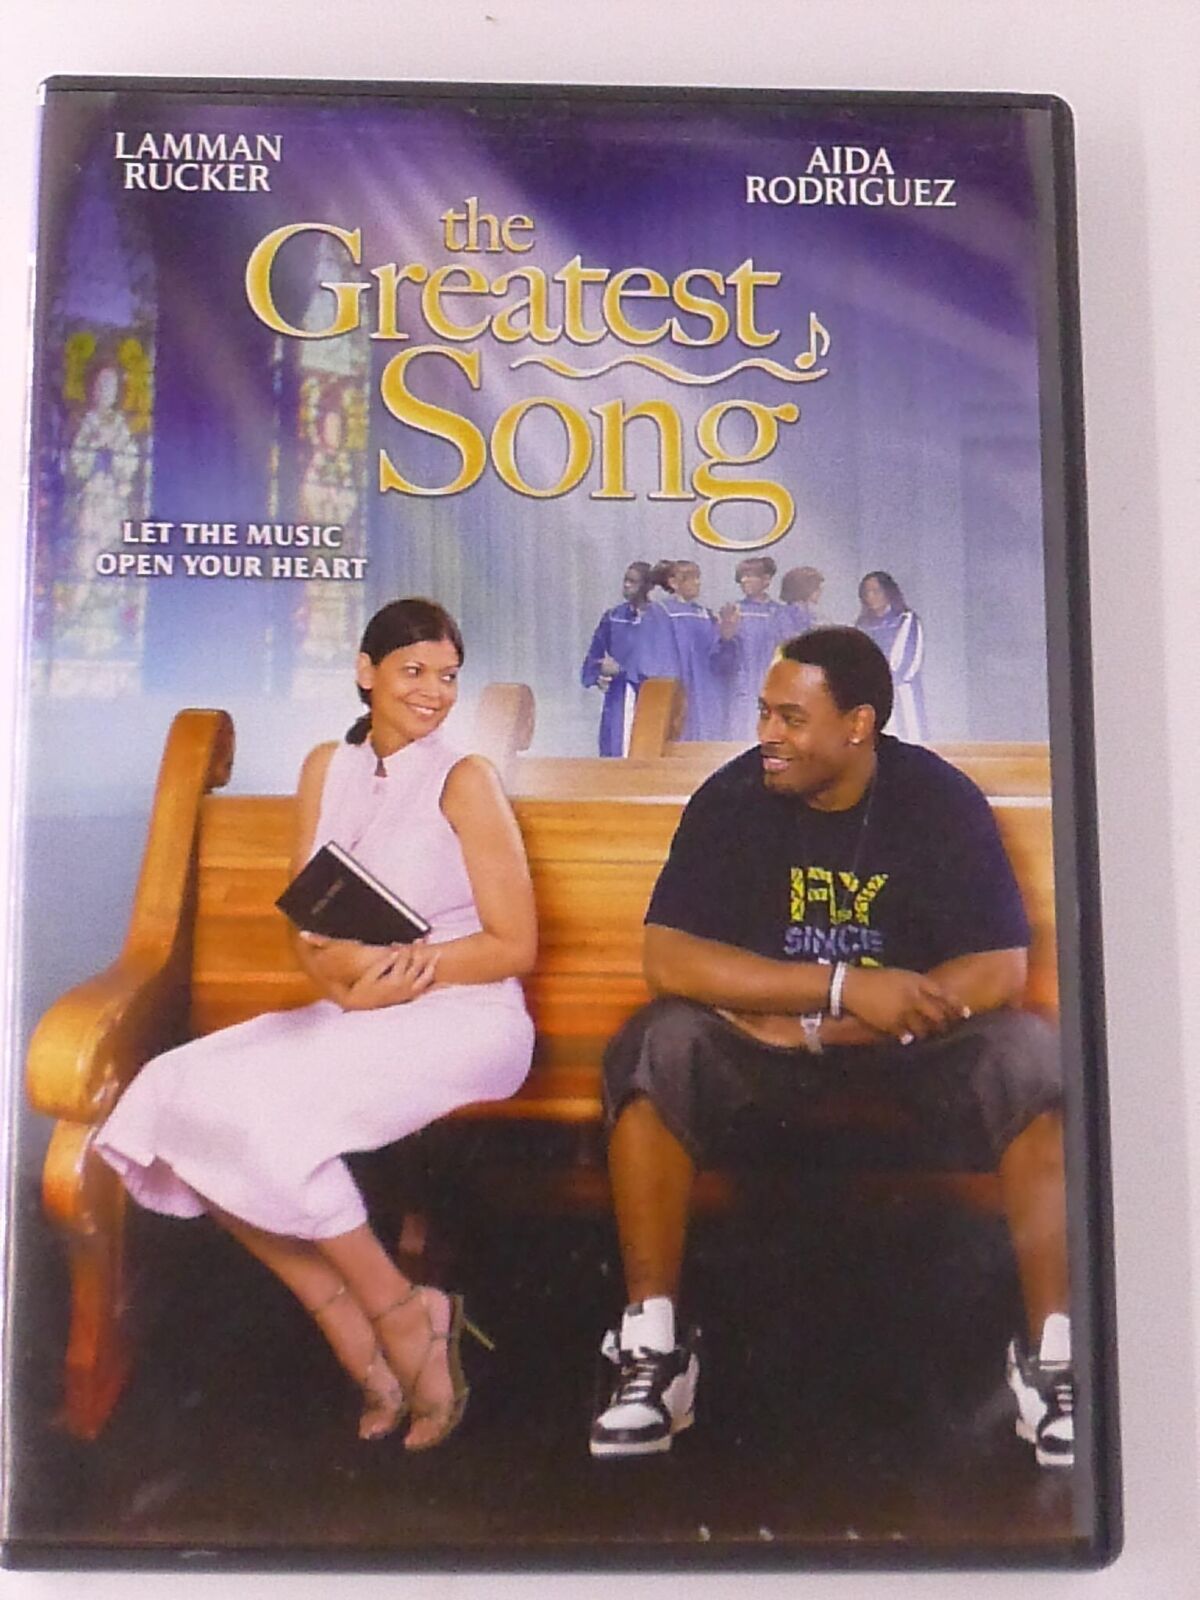 The Greatest Song (DVD, 2009) - J0409